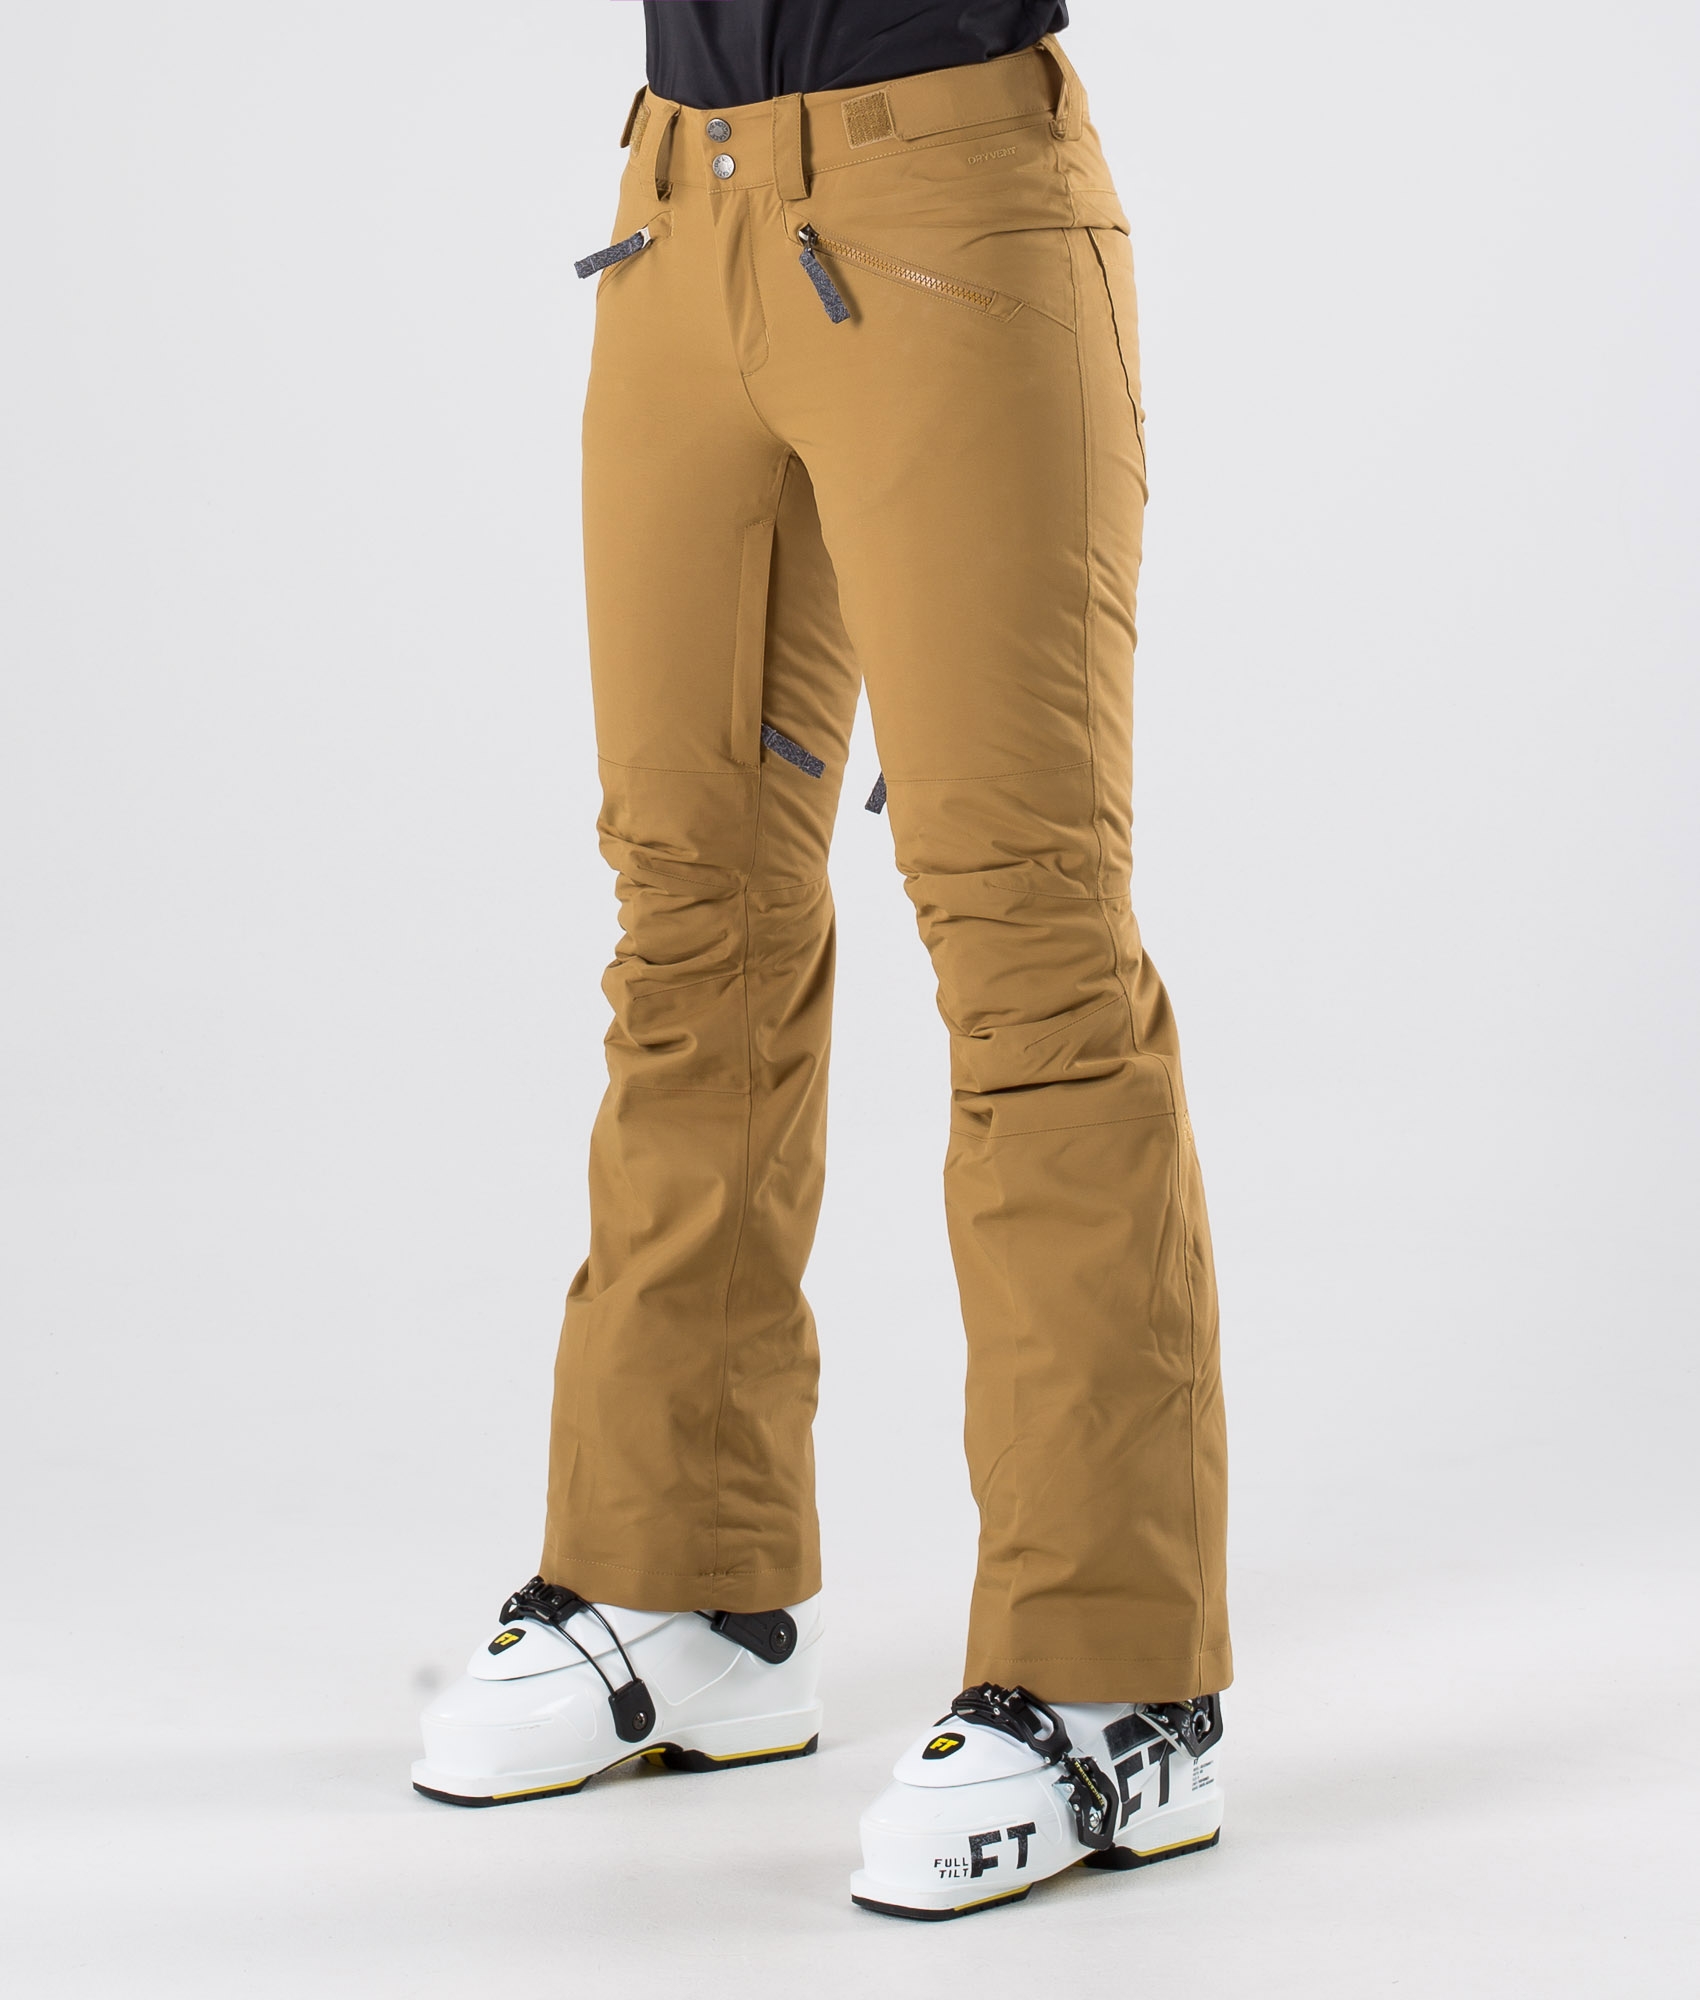 north face aboutaday pants